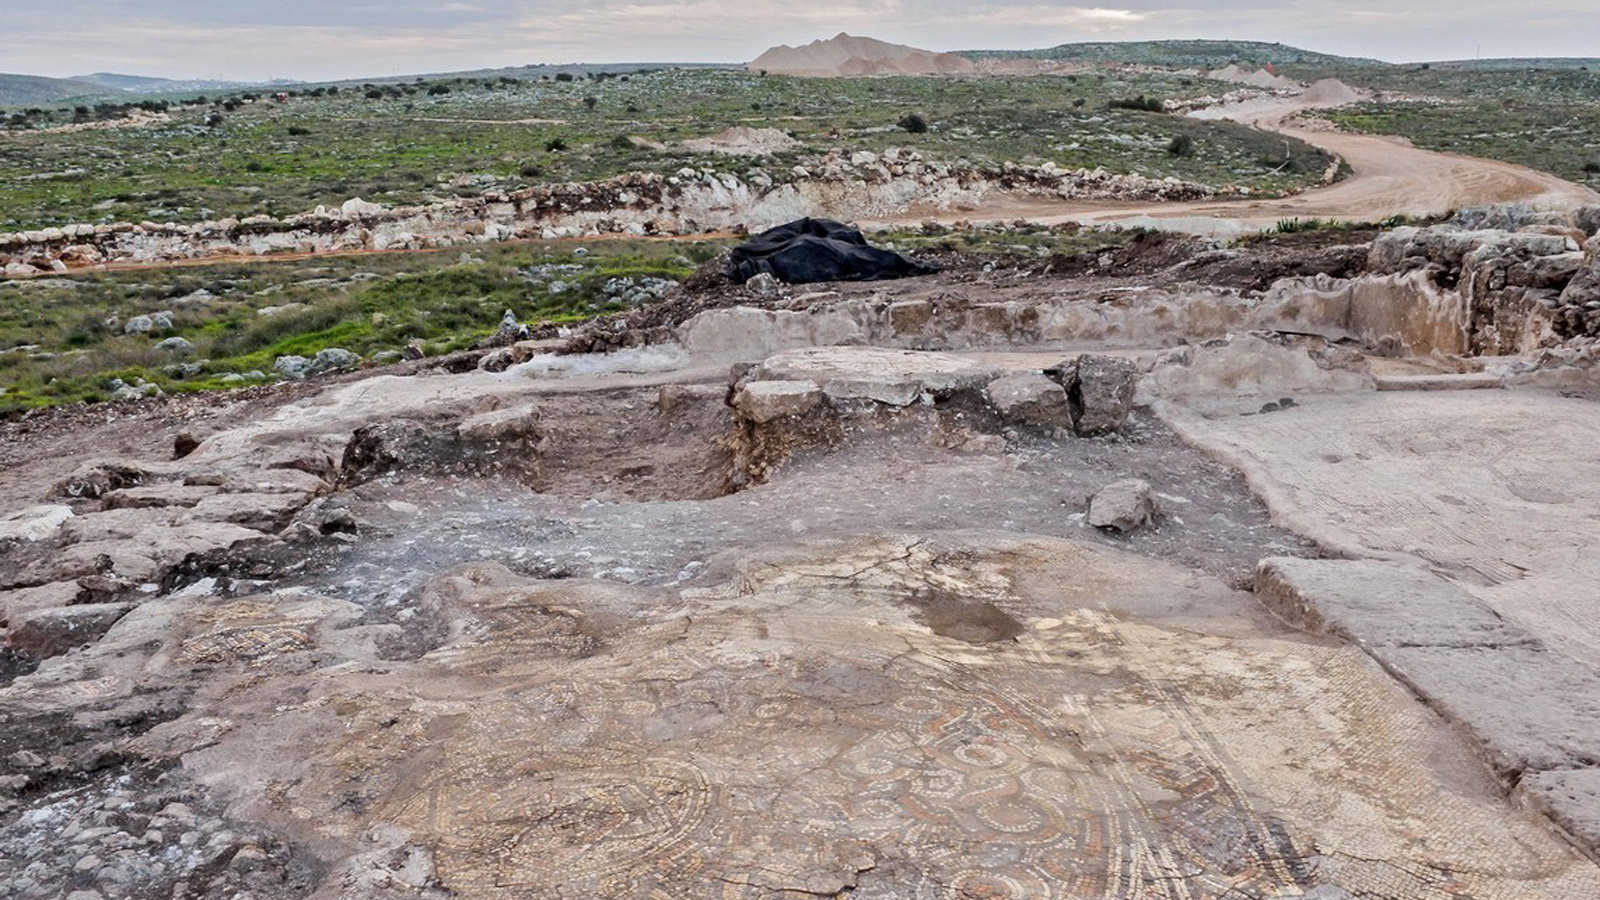 An aerial view of Rosh HaAyin excavations. Photo by Assaf Peretz, Courtesy of the Israel Antiquities Authority.